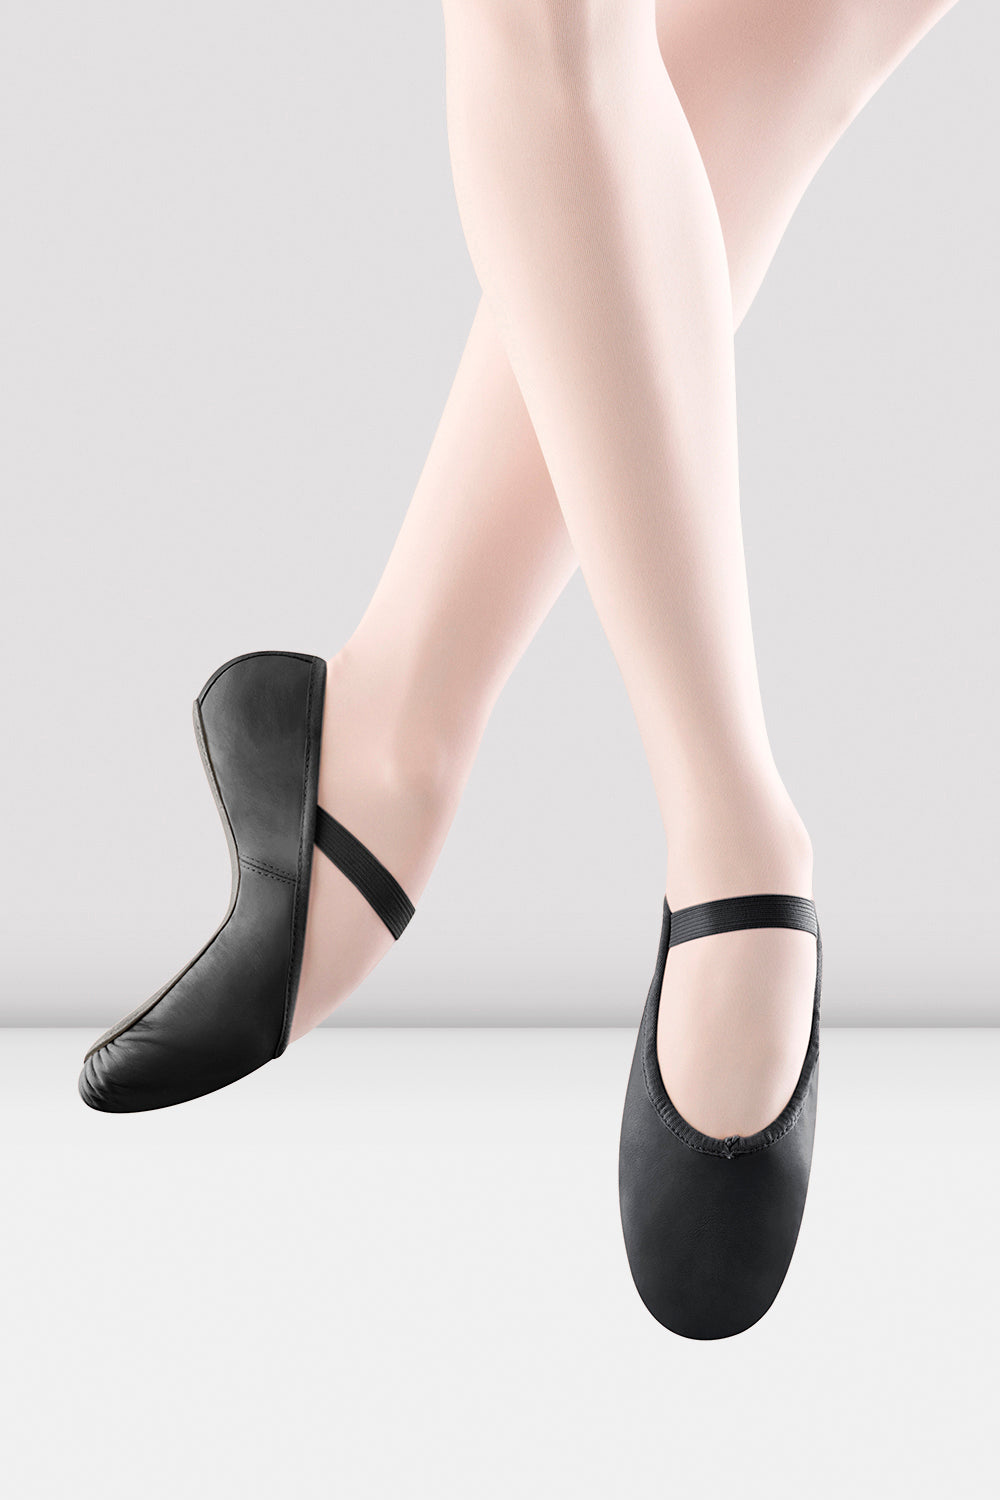 leather ballet shoes uk